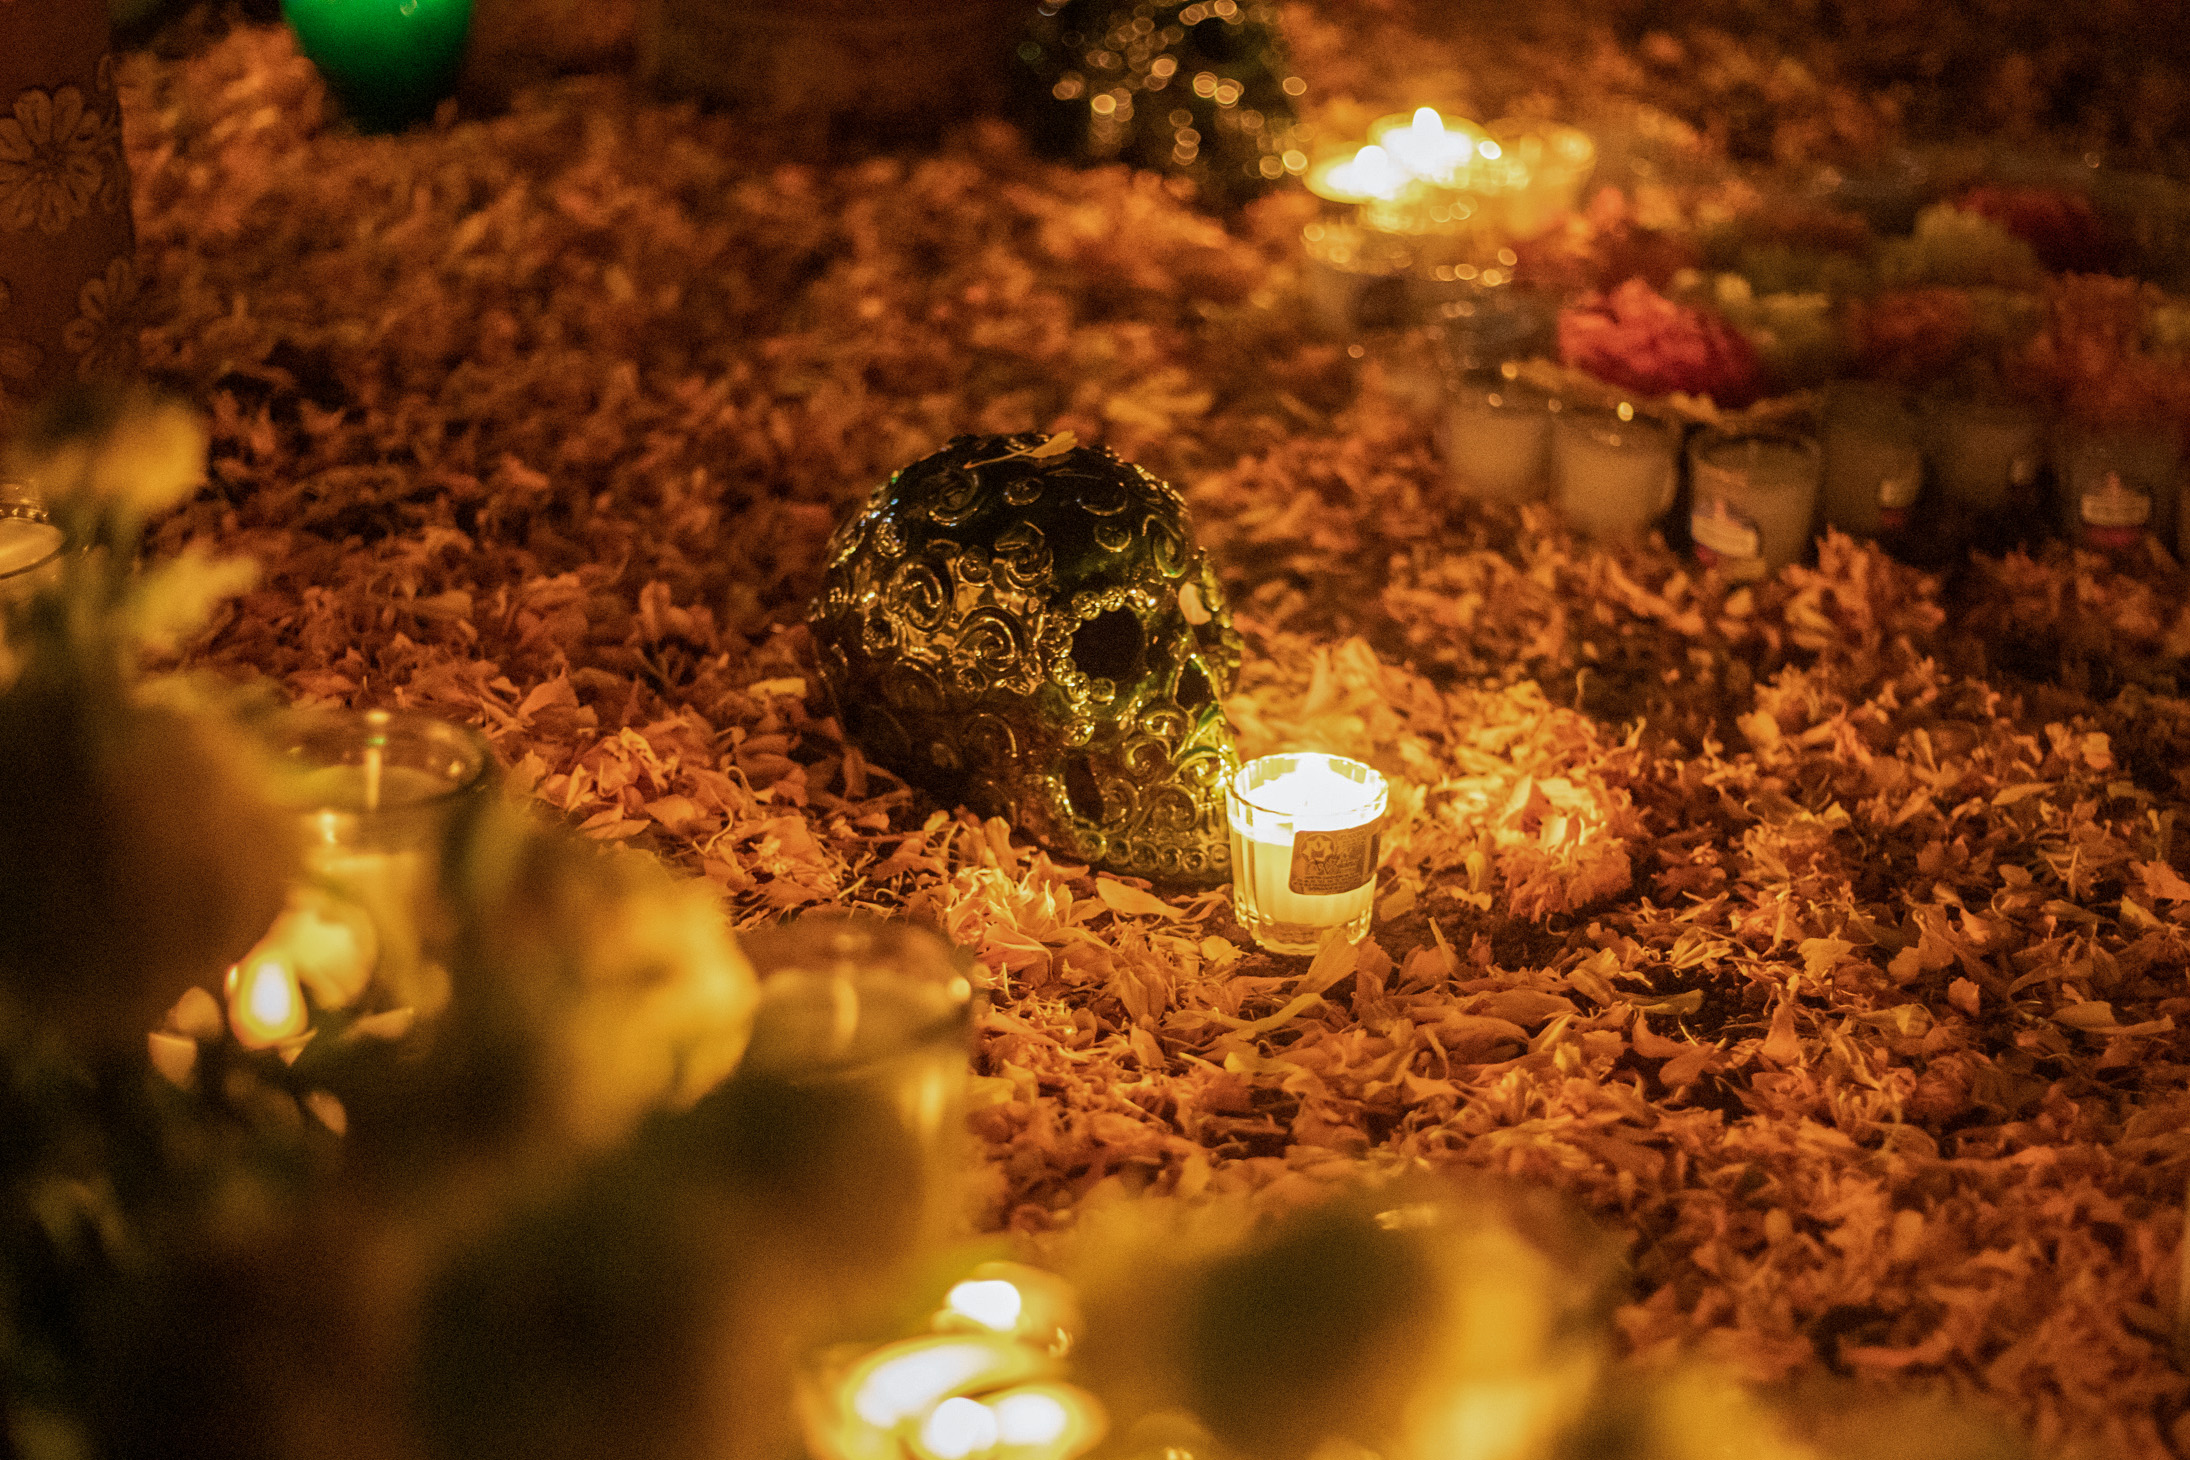 31 October 2022, Mexico, Oaxaca: Candles burn around an ornament skull at a decorated cemetery on All Saints' Day which celebrates the Day of the Dead. Photo: Felipe Perez/dpa